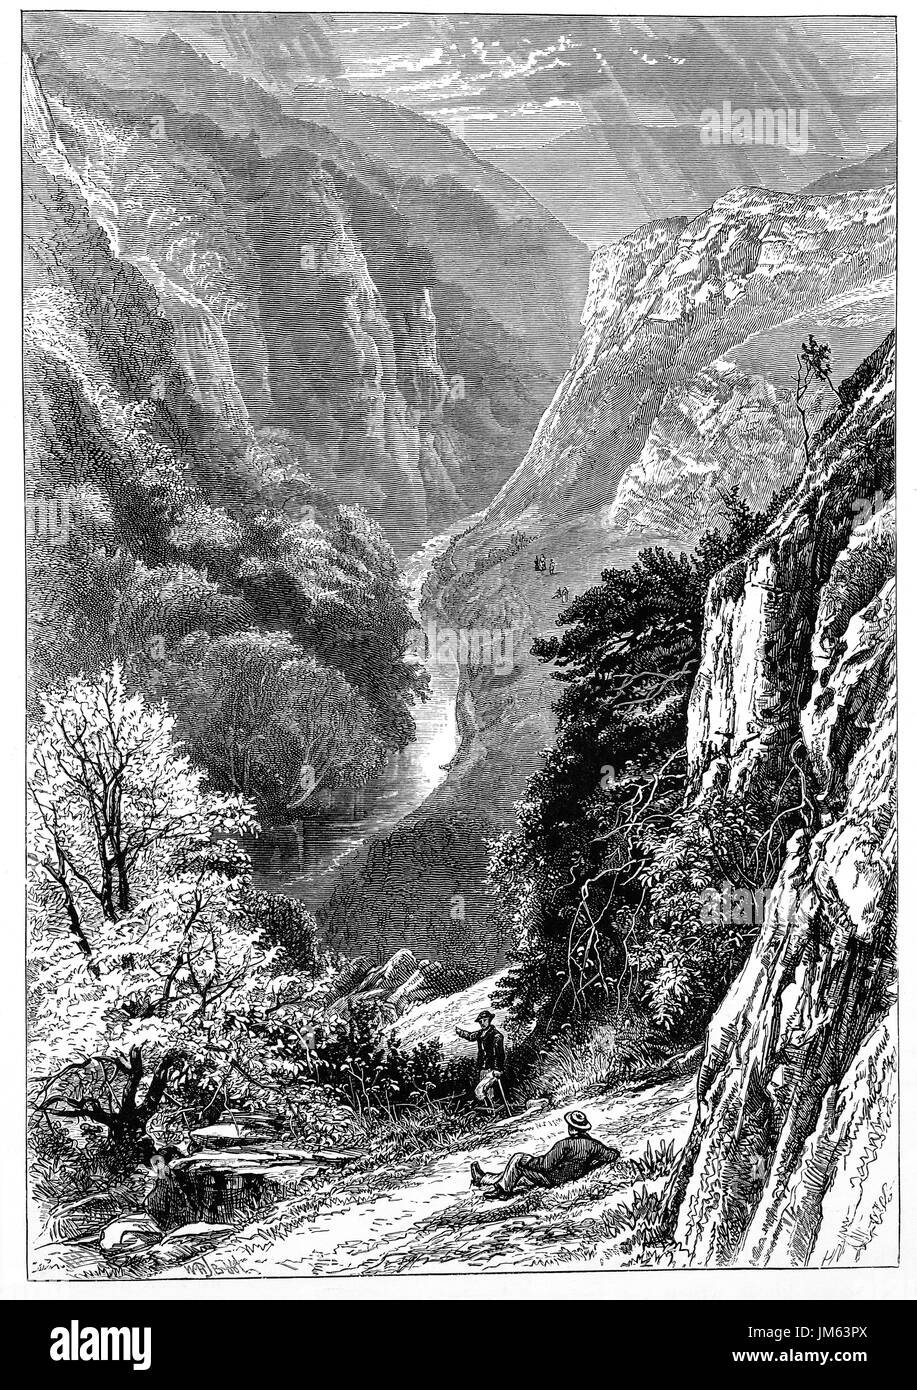 1870: Walkers above the River Dove flowing through Dovedale, a valley in the Peak District, Derbyshire, England Stock Photo